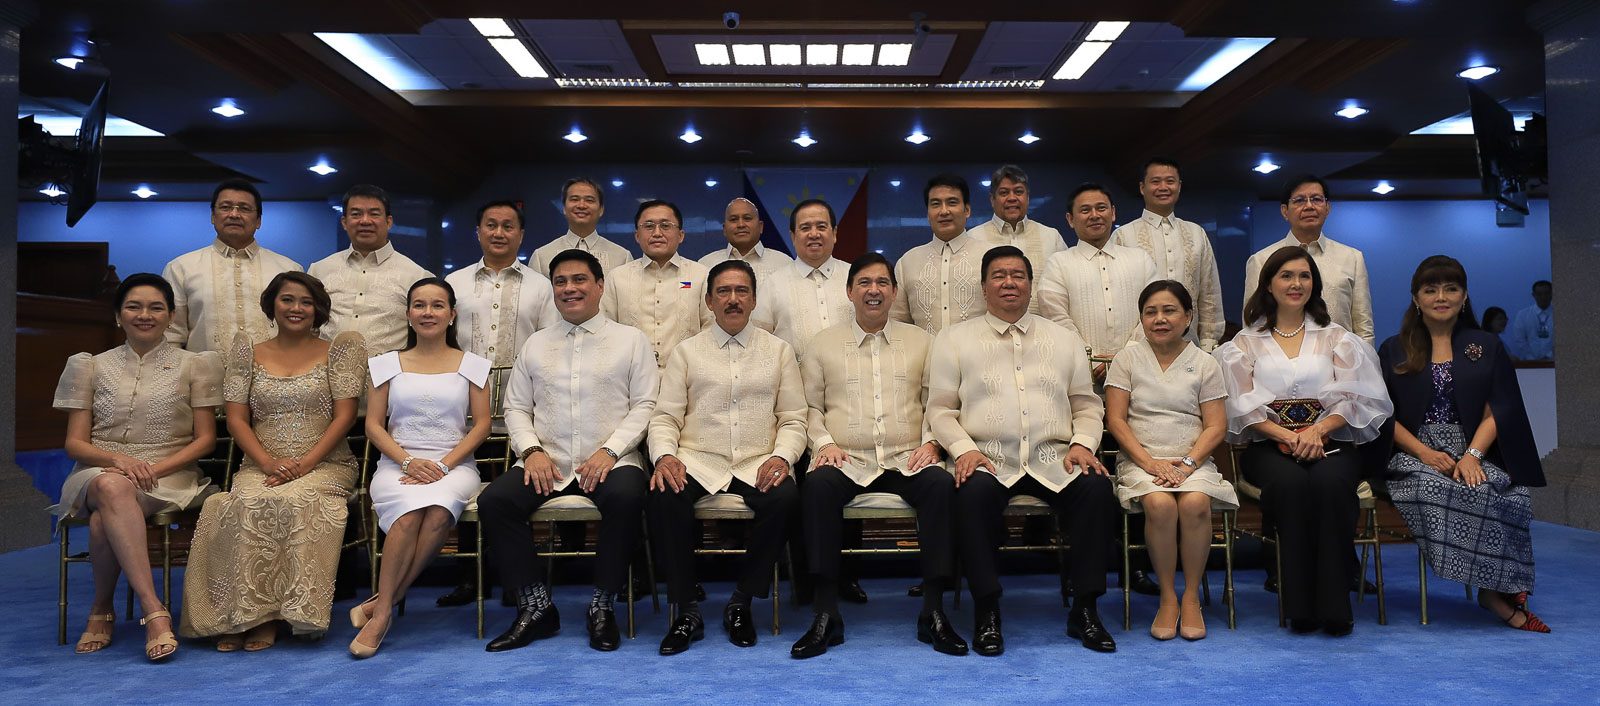 LIST: Senate committee chairmanships for the 18th Congress